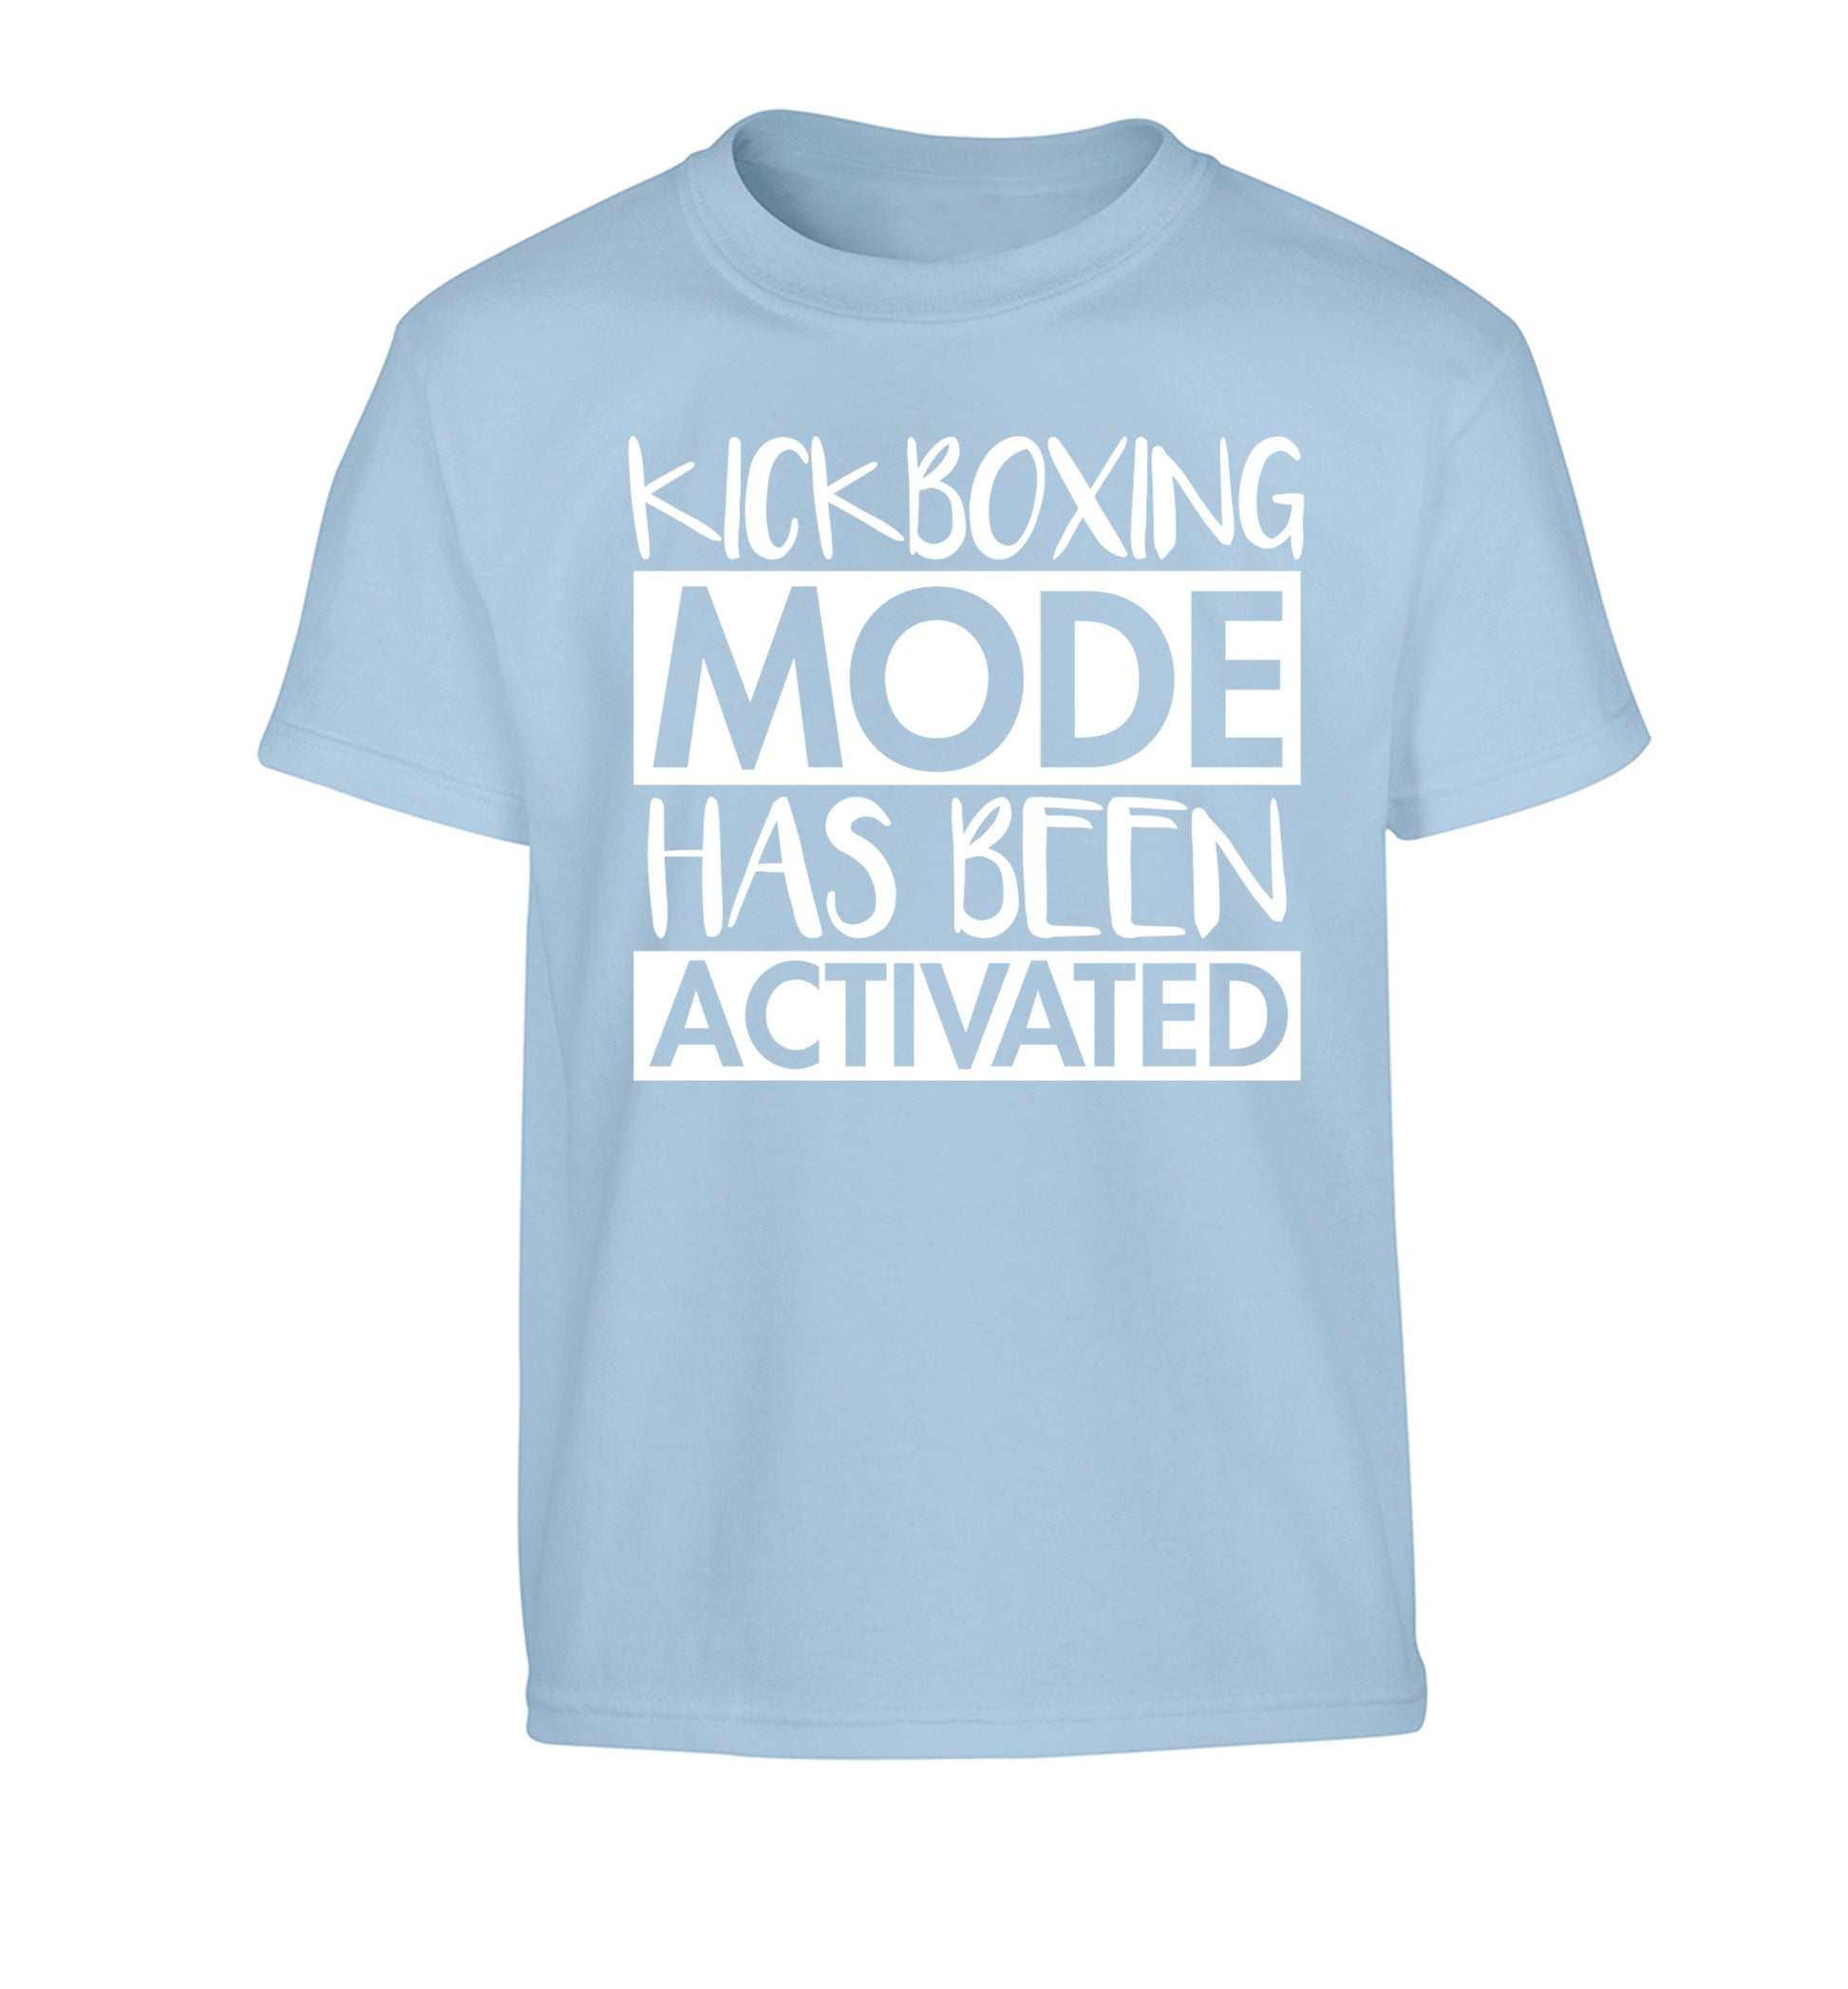 Kickboxing mode activated Children's light blue Tshirt 12-14 Years